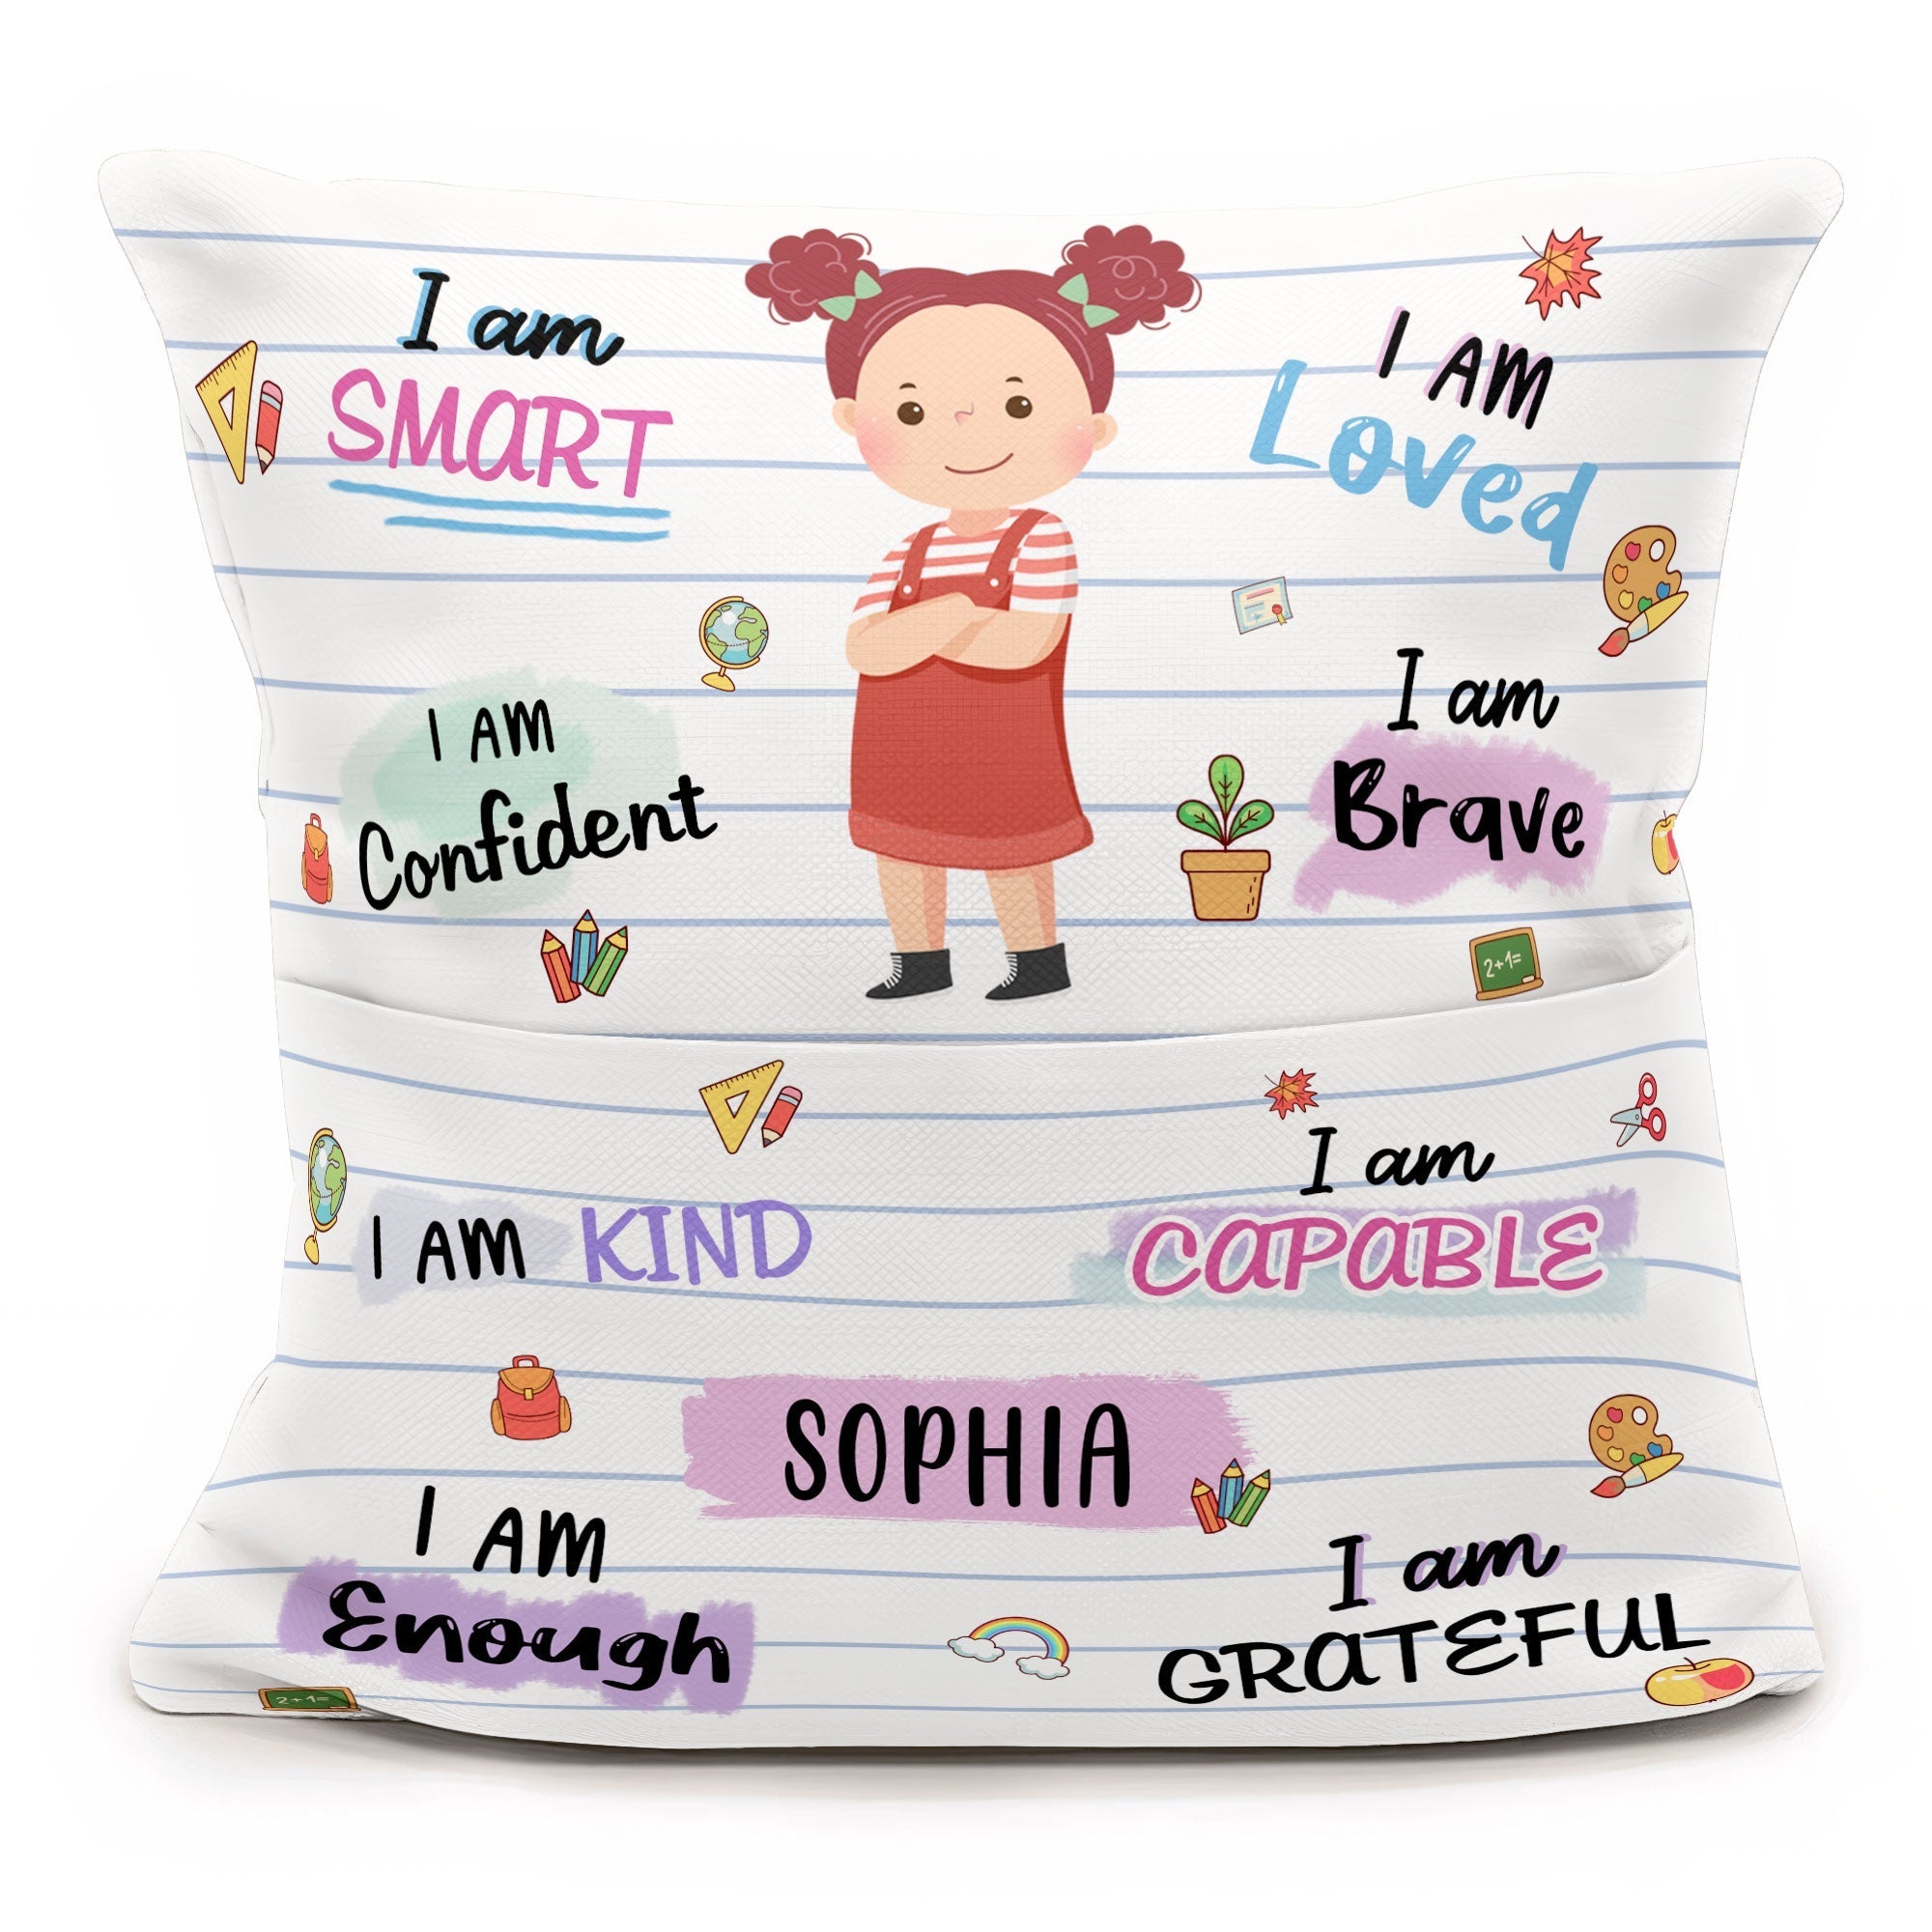 I Am Confident - Personalized Pocket Pillow